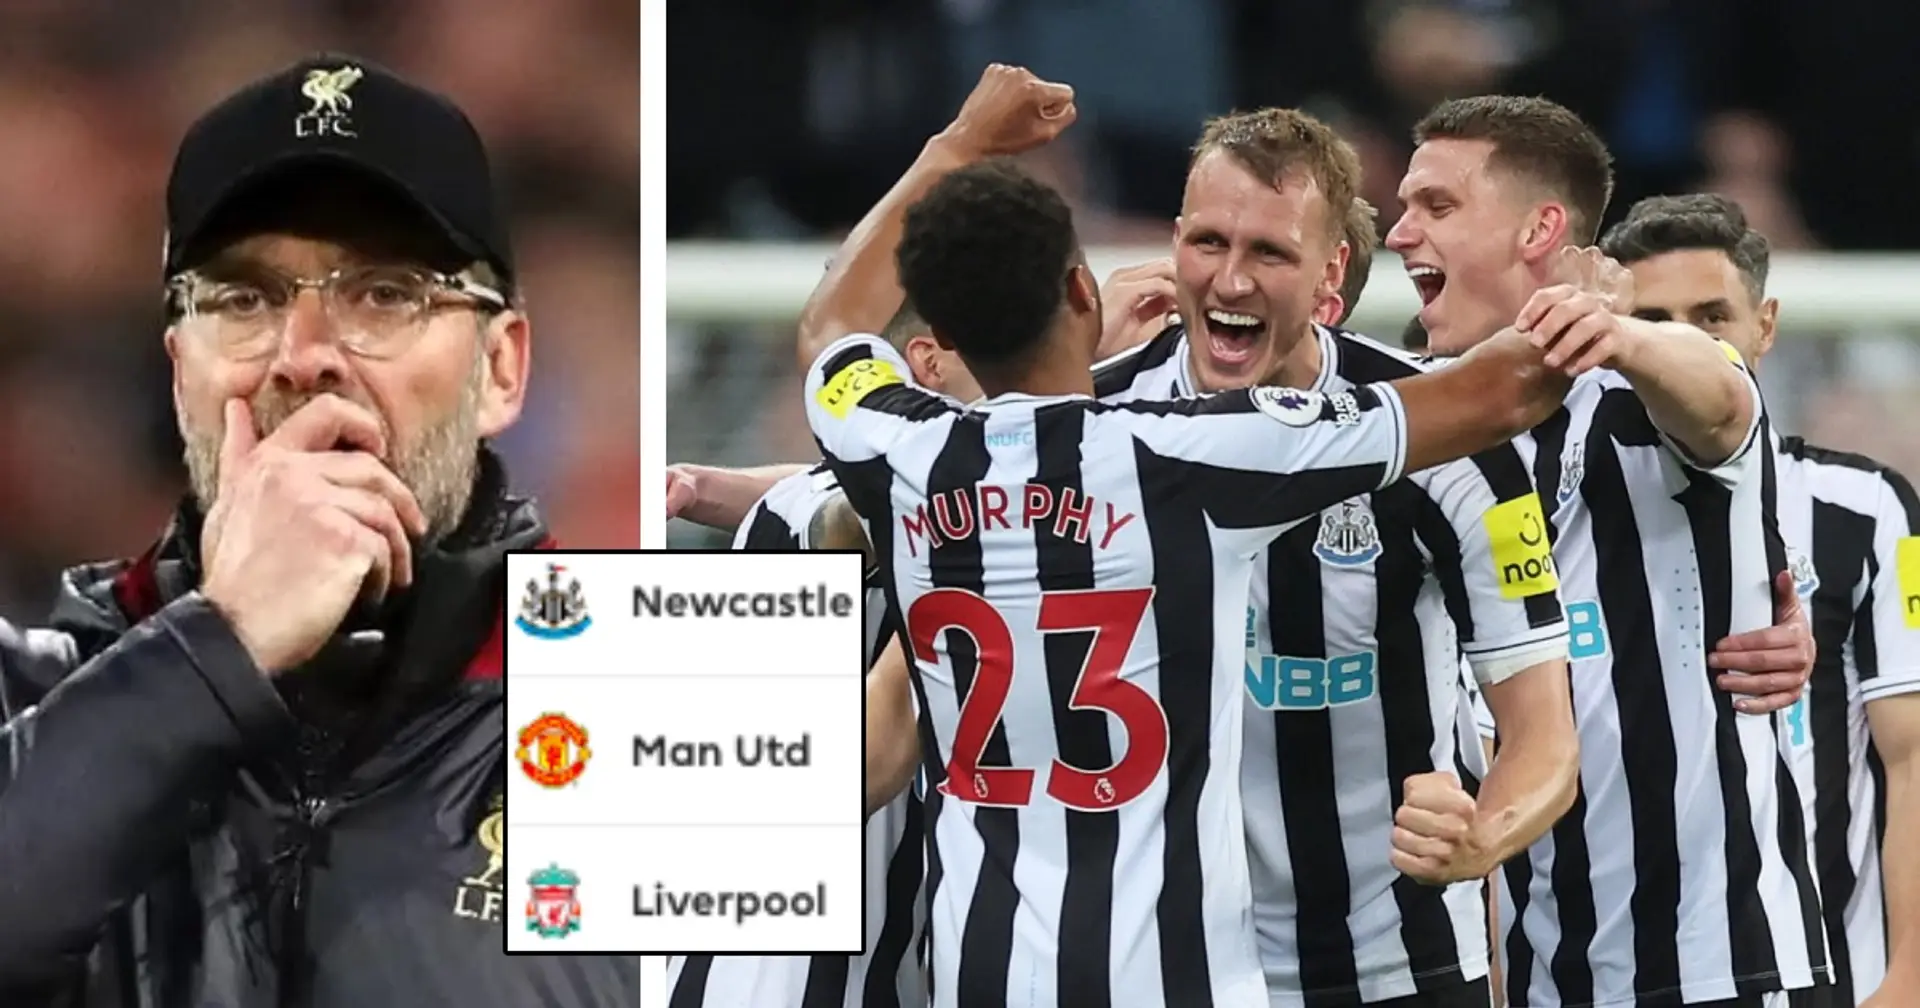 Newcastle qualify for Champions League: Liverpool's only path to Europe's elite competition revealed